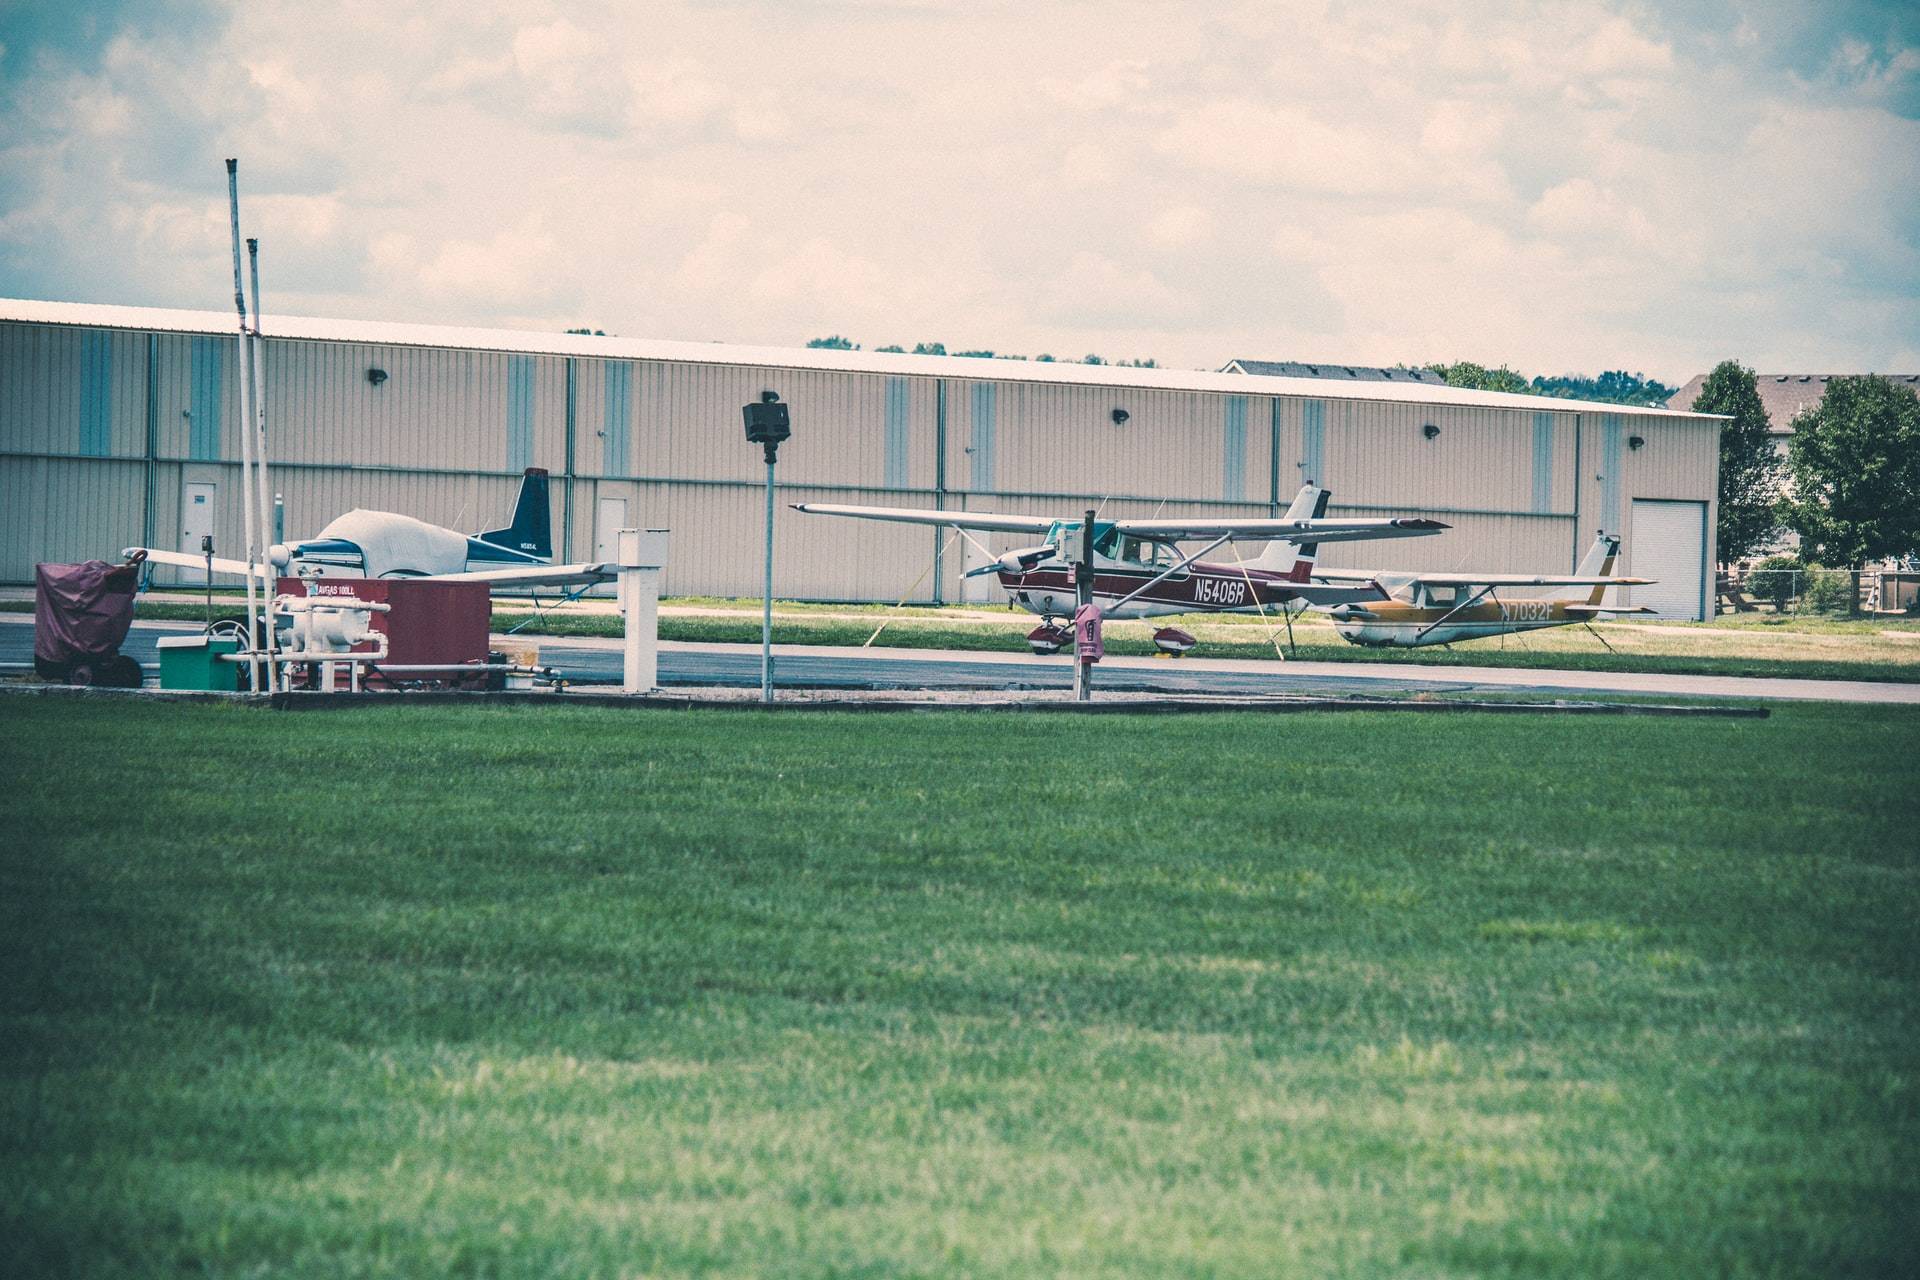 Planes parked at a small airport